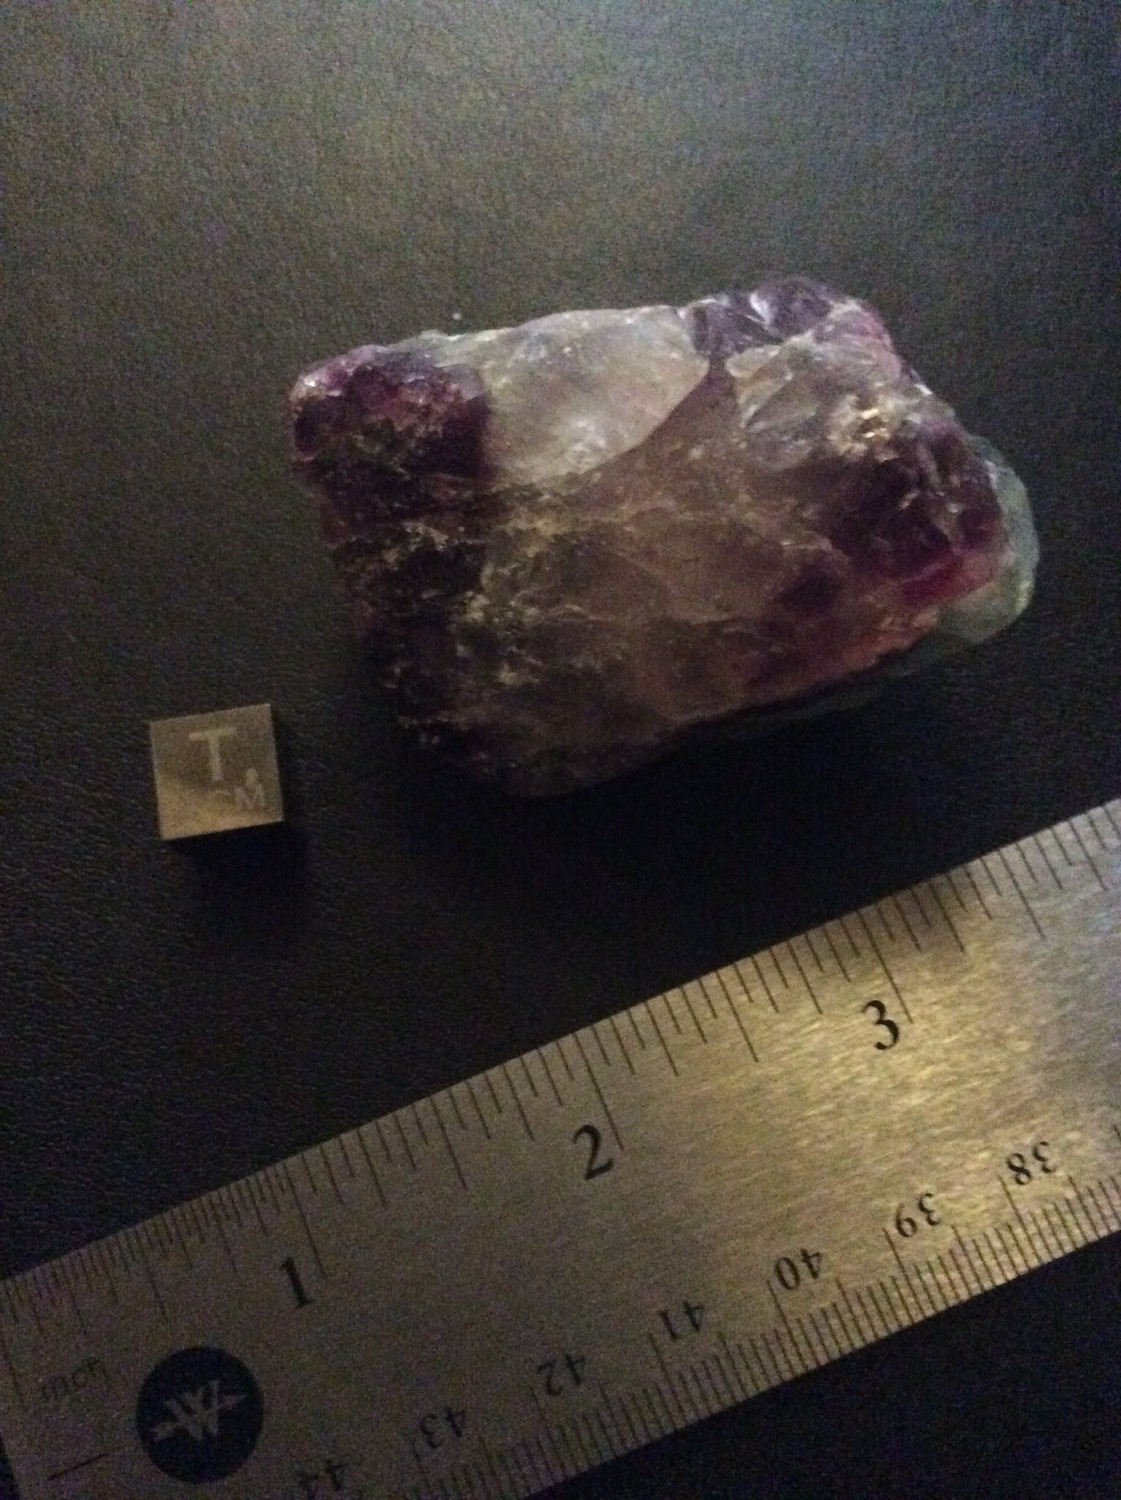 Green And Purple Crystal Increase Energy Of Aura Intensify Etheric Body Emitted Spiritual Self